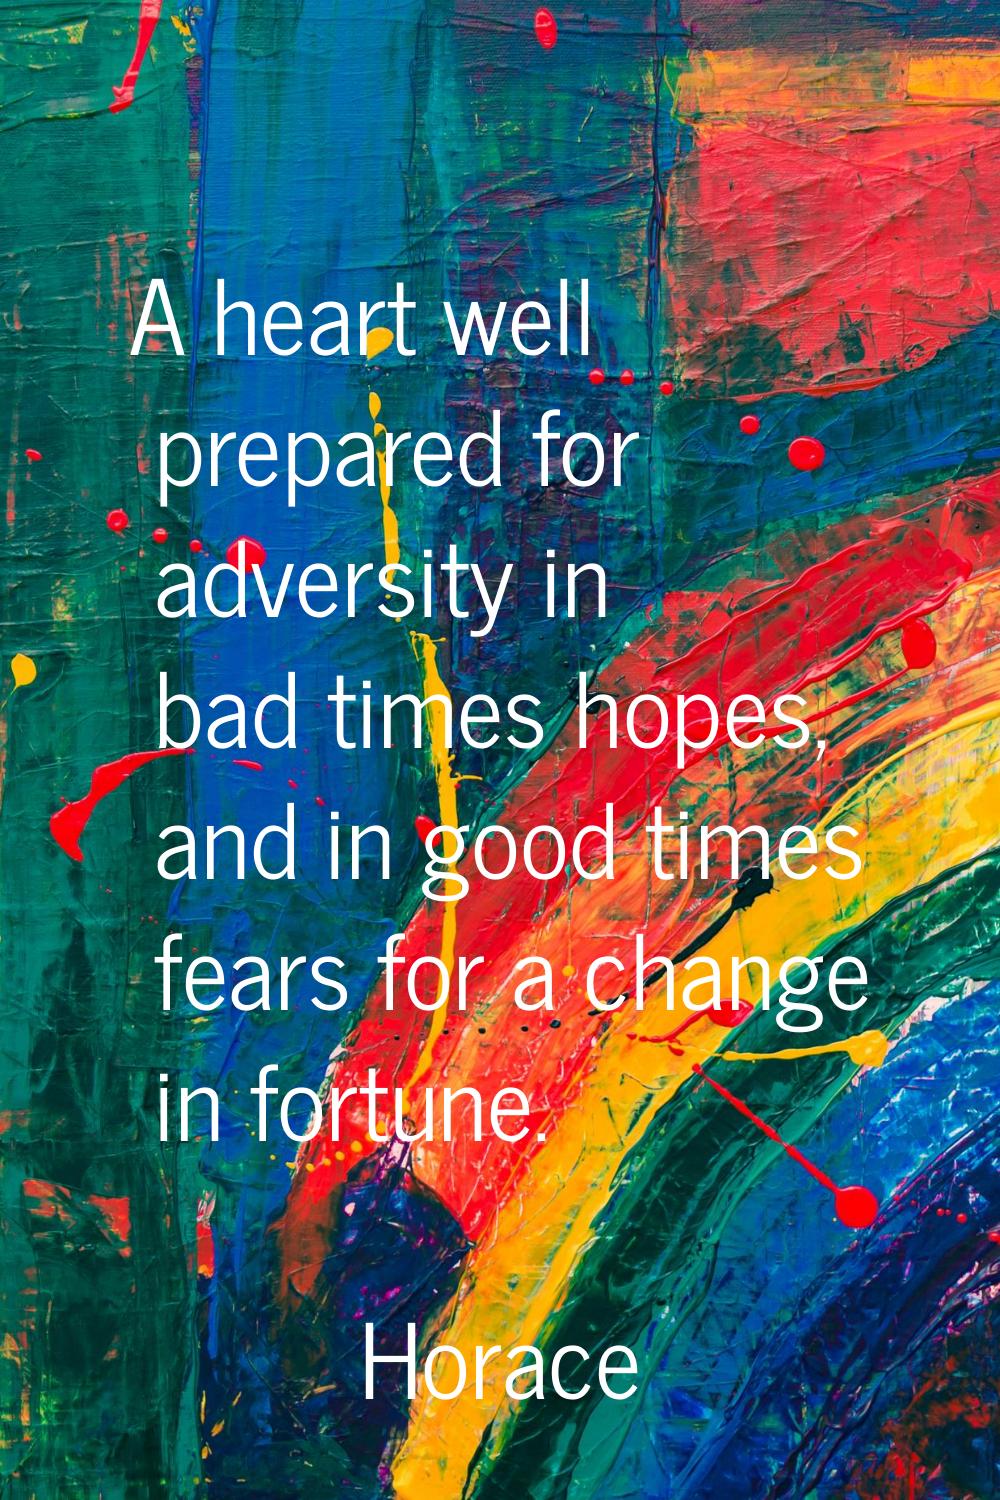 A heart well prepared for adversity in bad times hopes, and in good times fears for a change in for